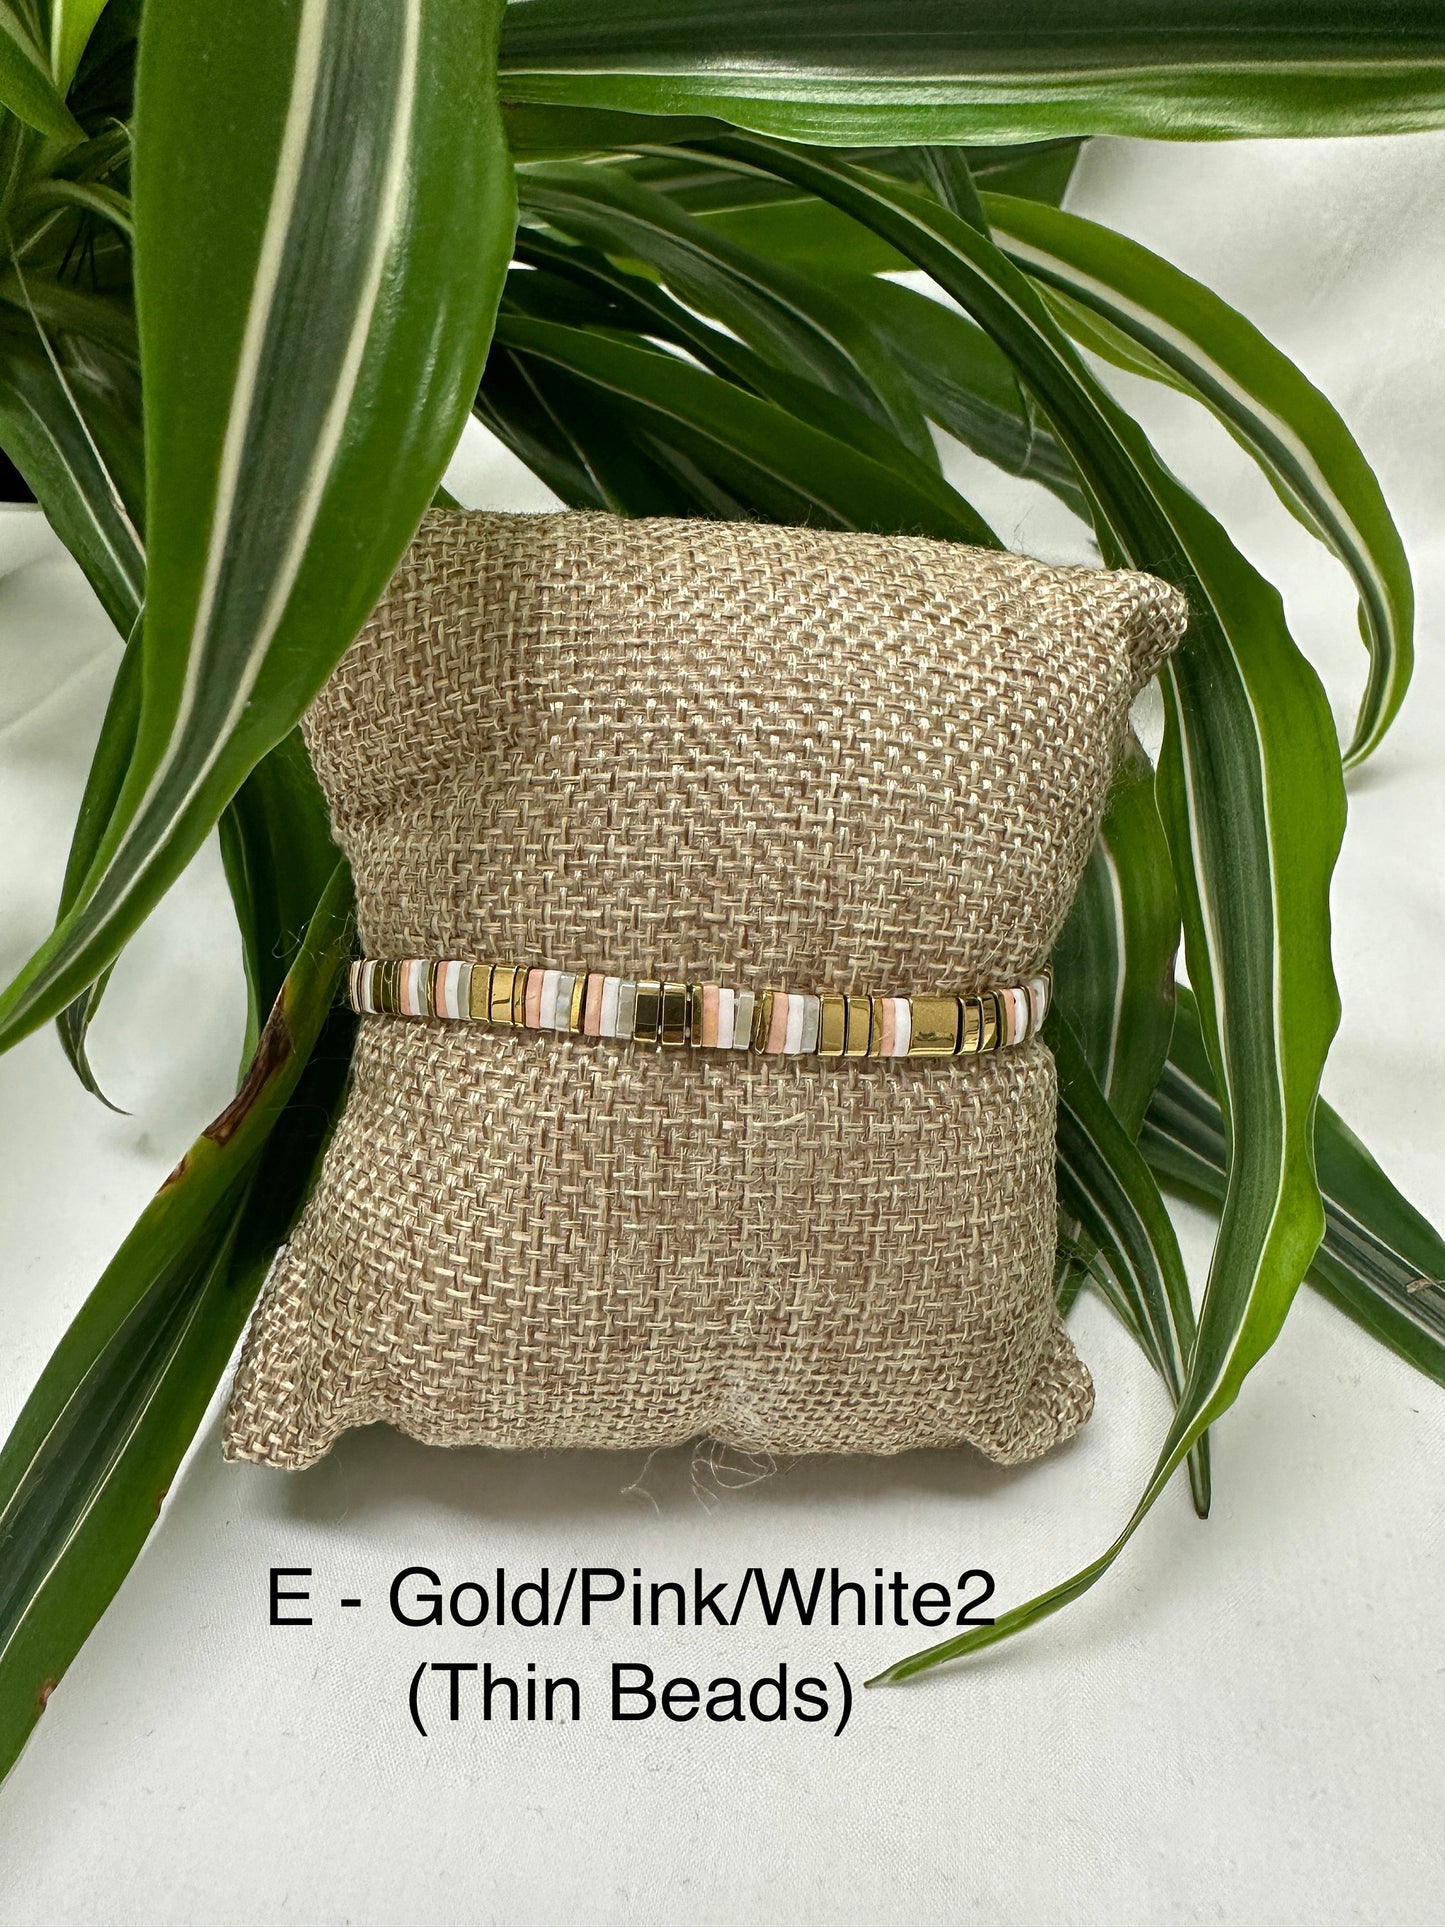 TILA BRACELETS for women ~ Stretchy and Stackable ~ Super Cute - BoHo, Hippy, Classic ~ Free Gift Bag and Shipping